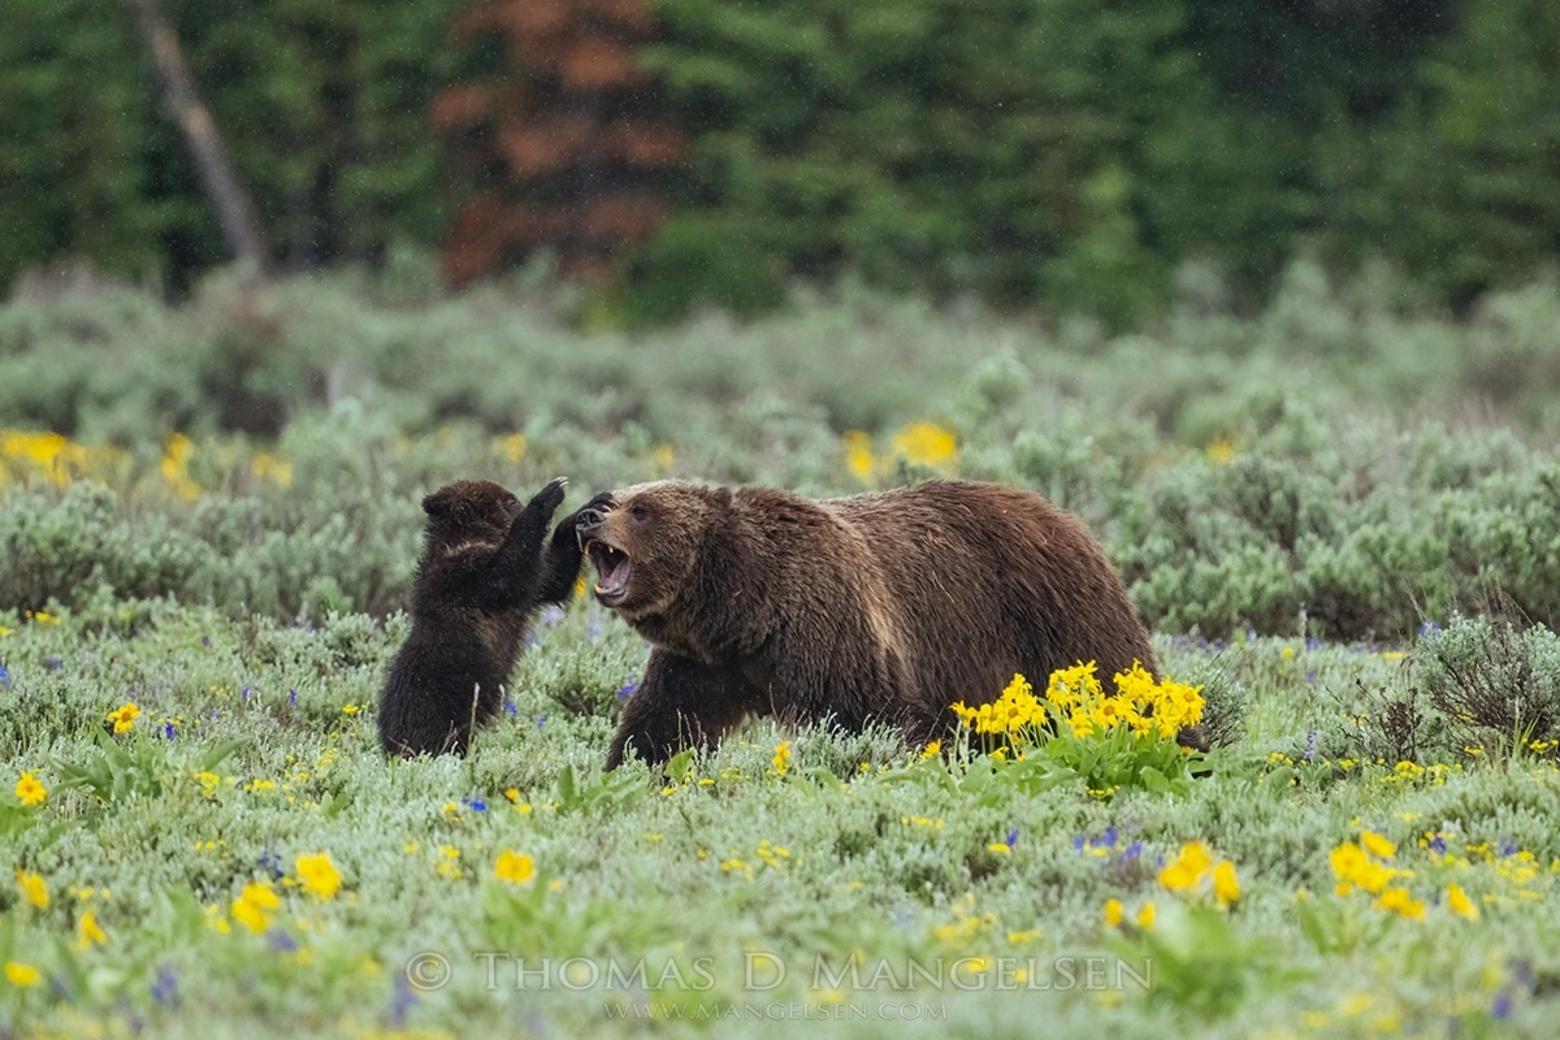 What is 399's cub trying to tell its mother or is it a game of peekaboo? 